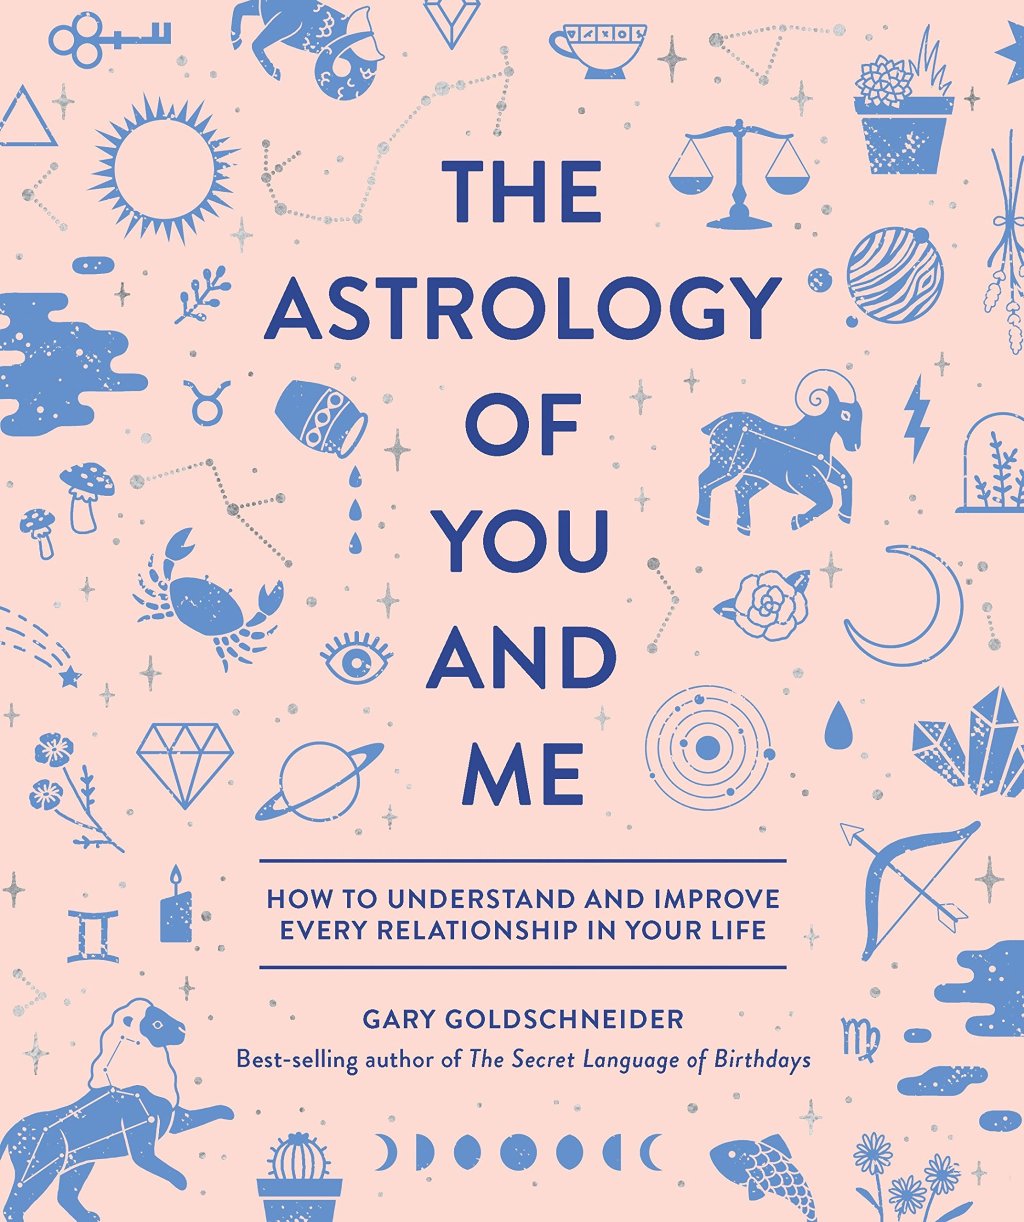 Astrology of You and Me Book Amazon